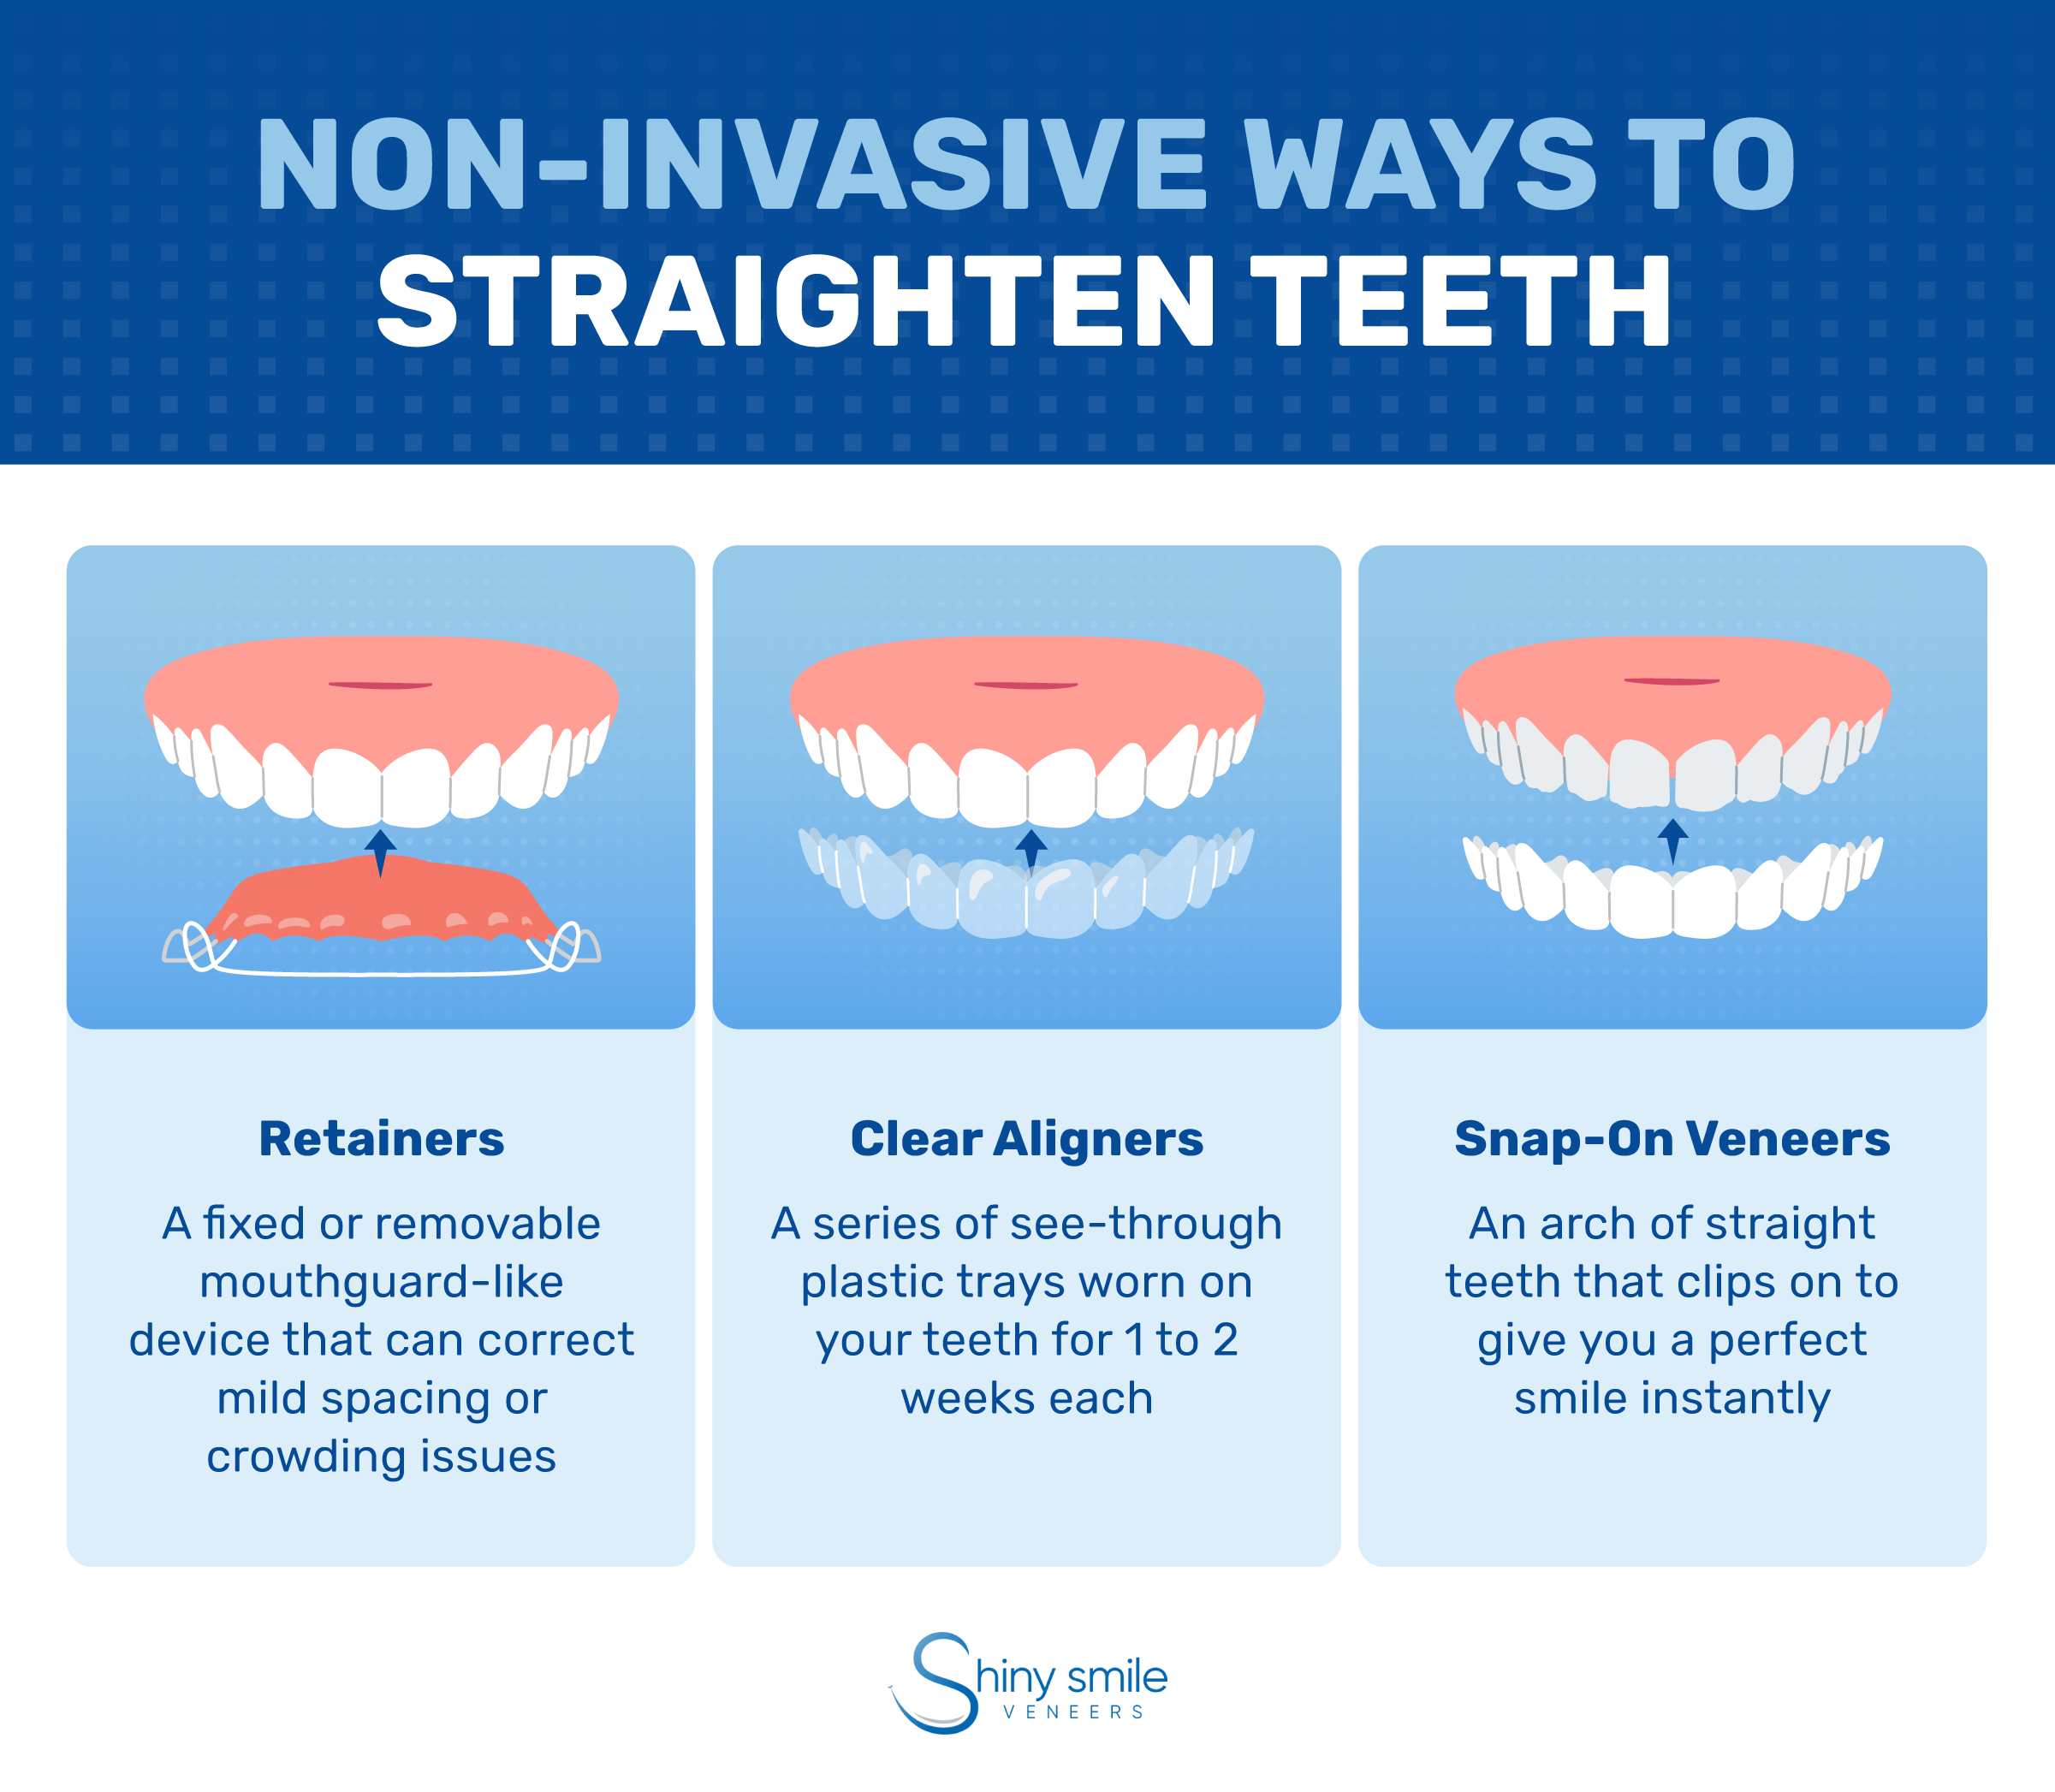 7 Ways to Straighten Teeth Without Braces